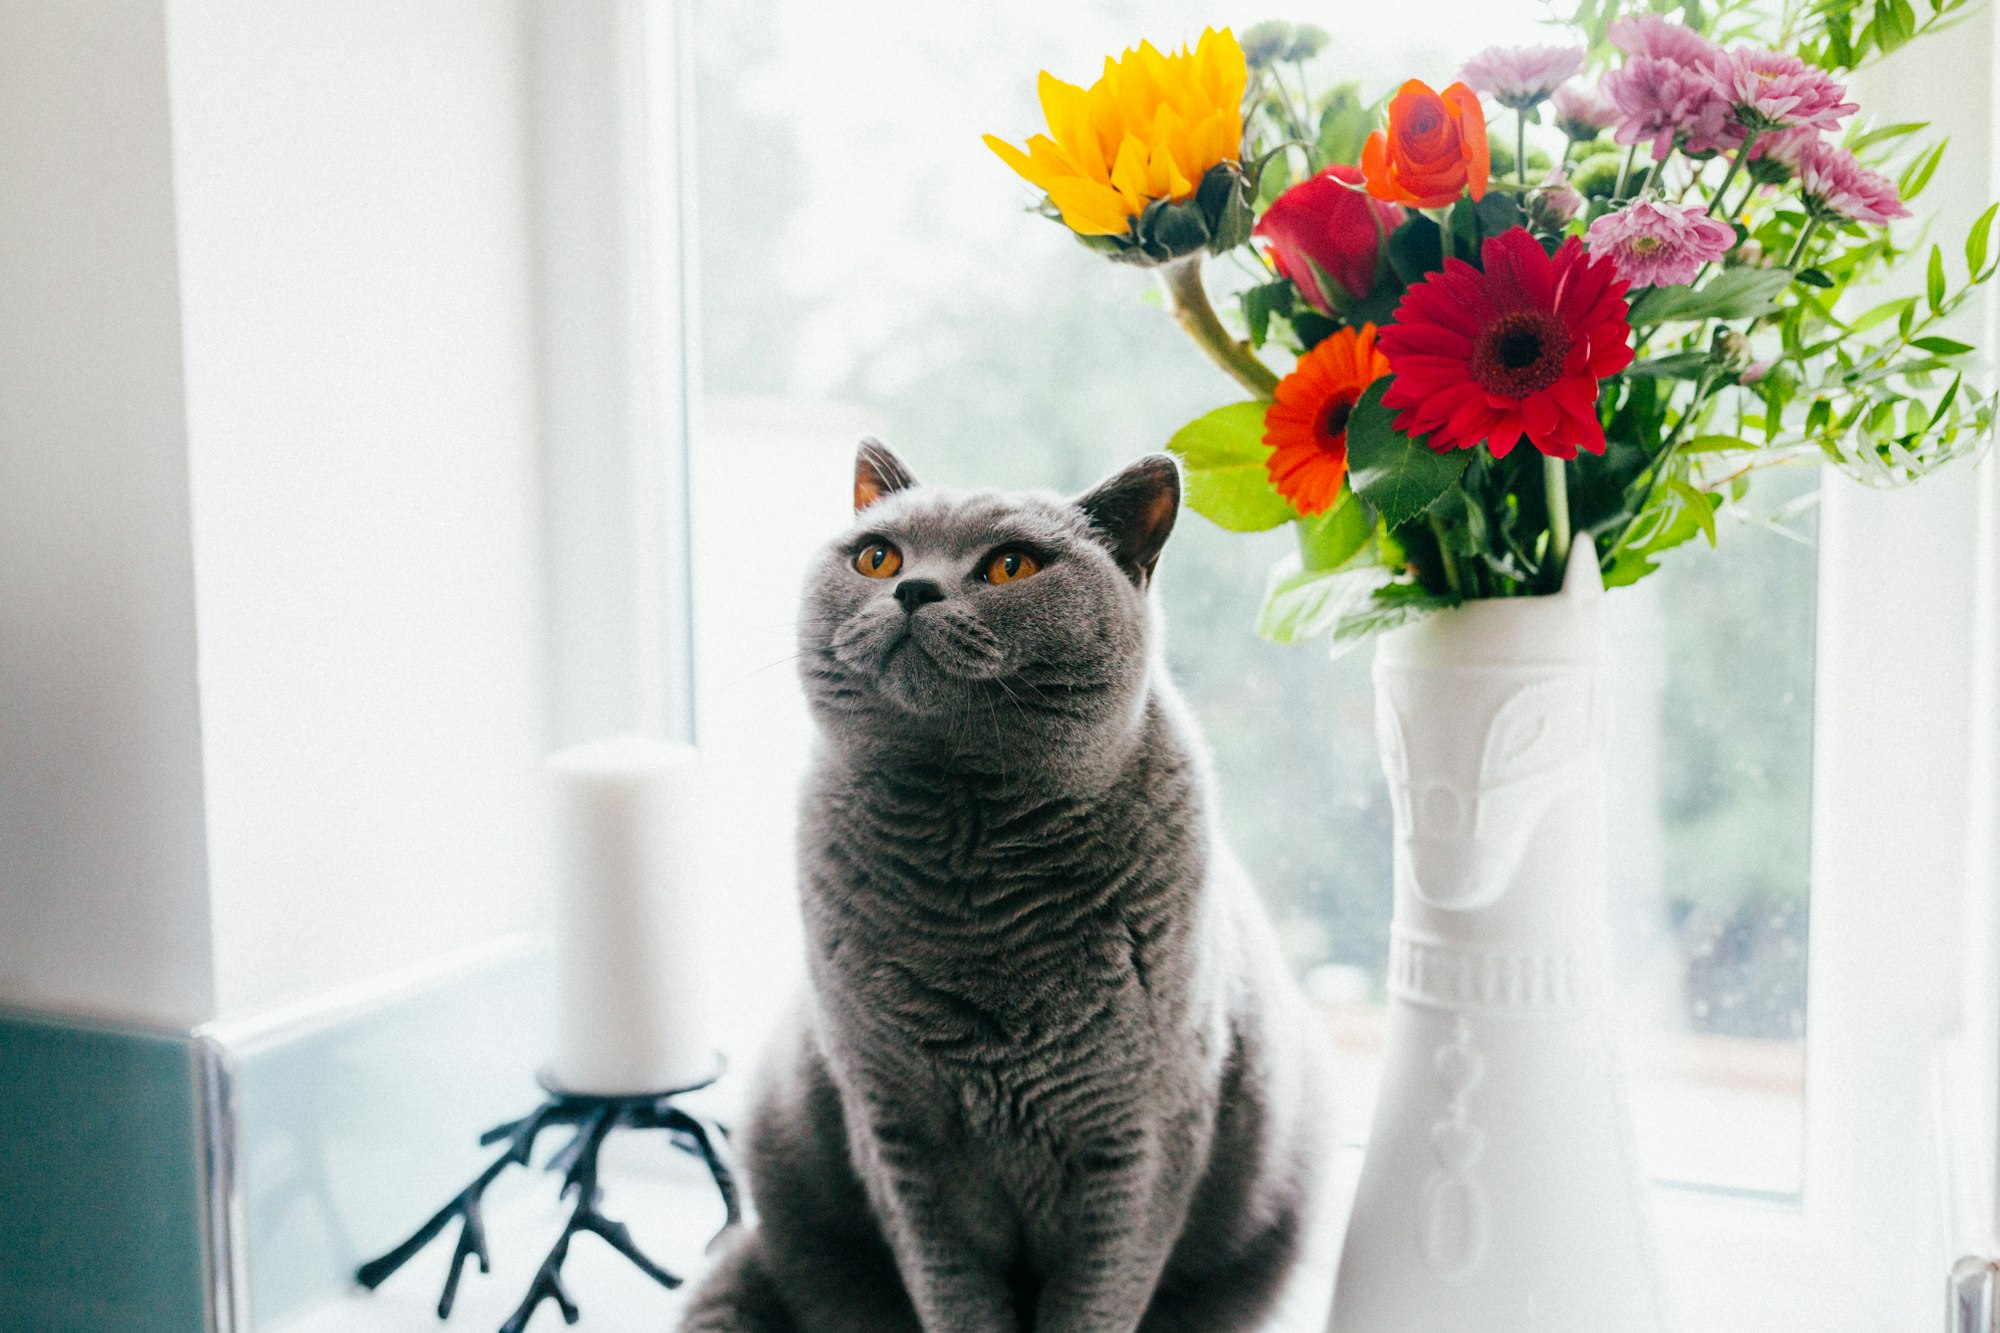 Russian blue cat standing near ceramic vase with artificial flowers